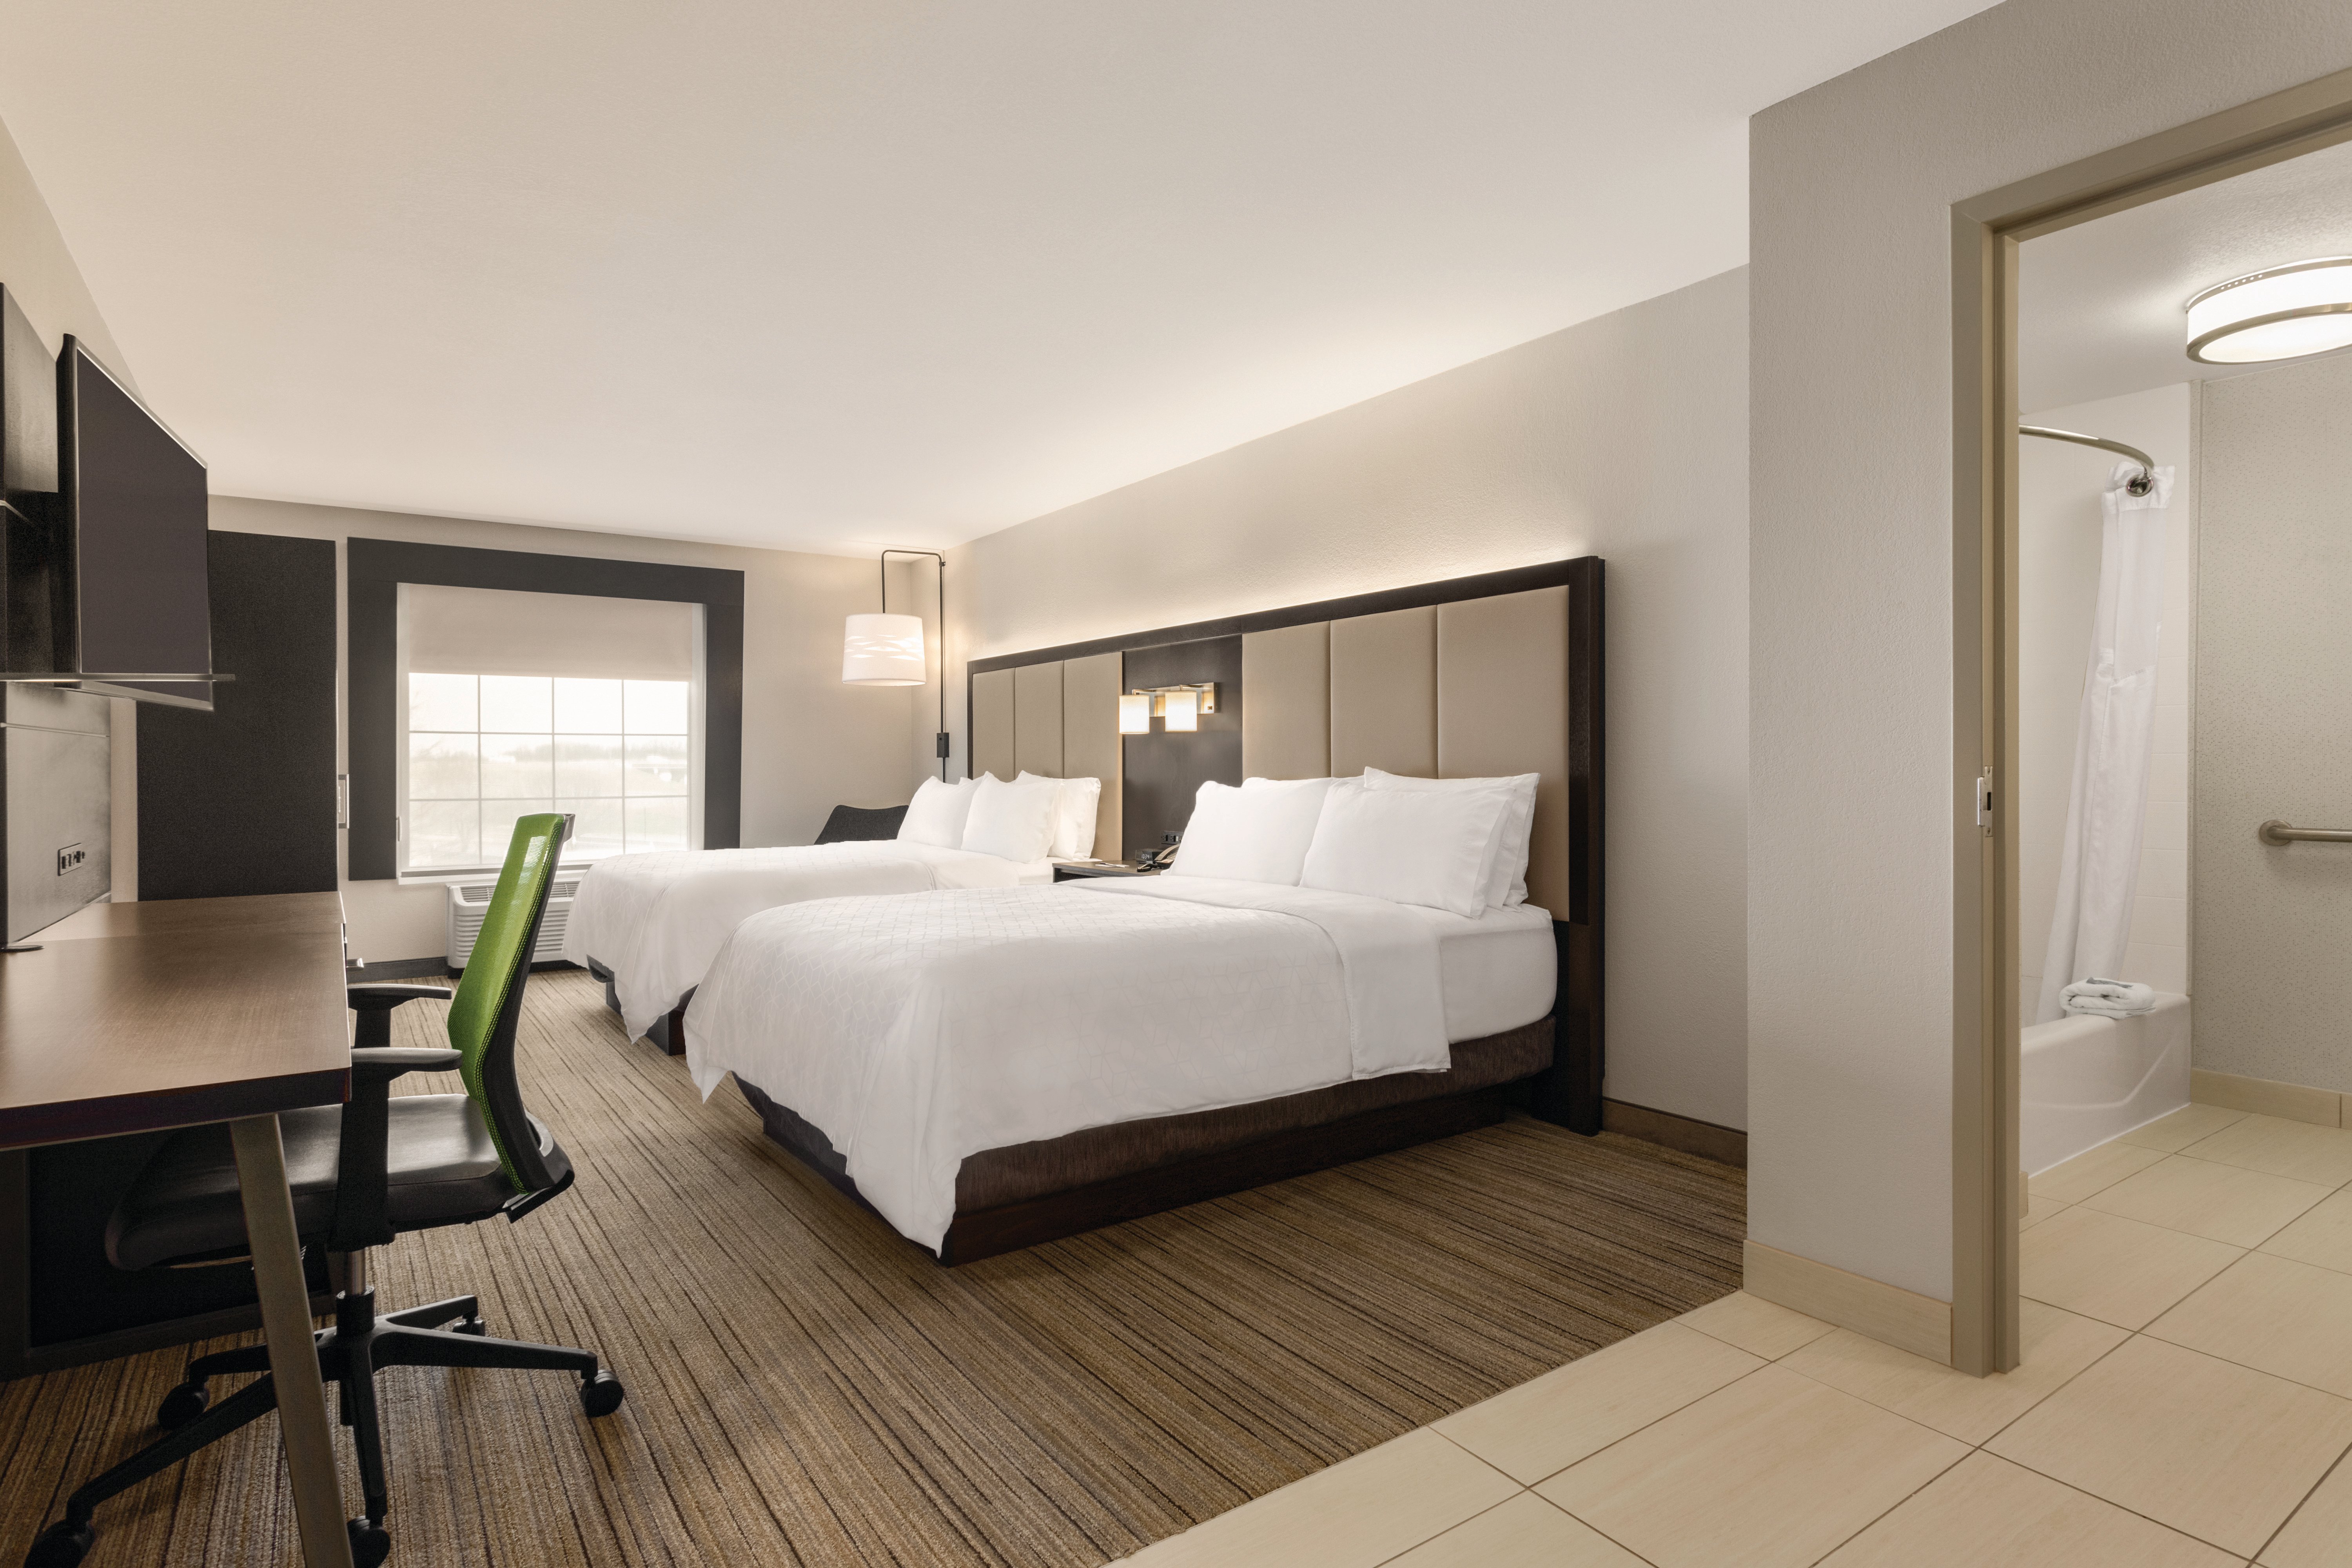 Our rooms are designed for corporate and leisure traveler alike